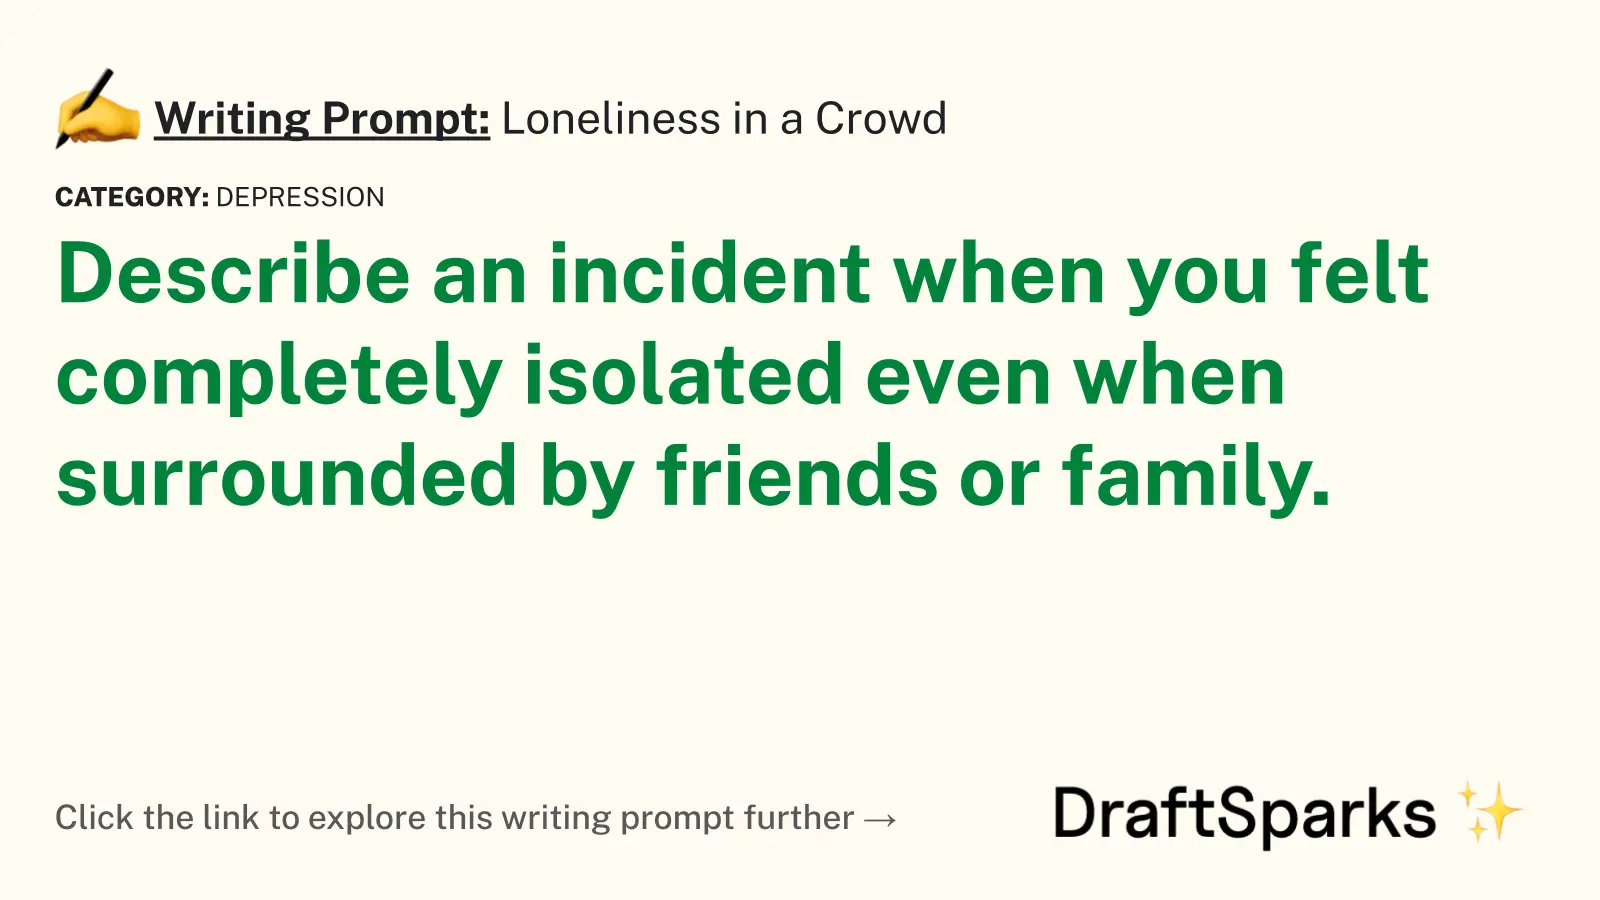 Loneliness in a Crowd